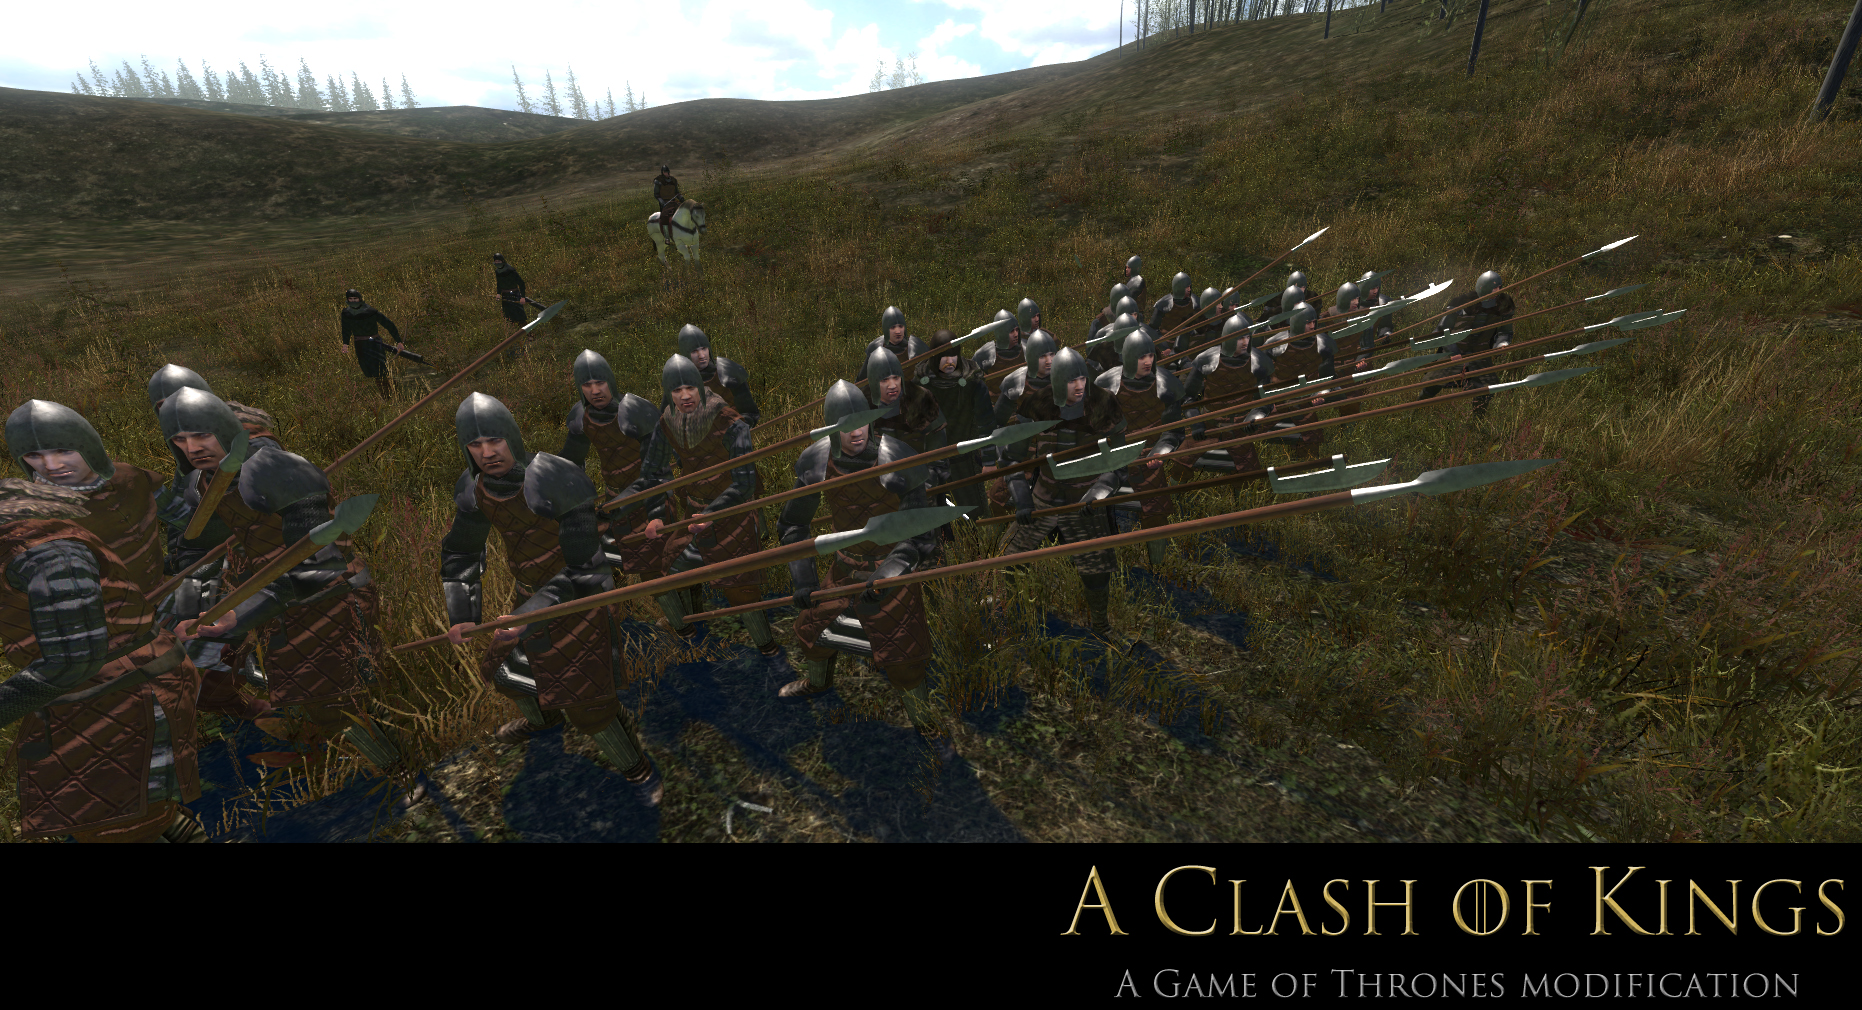 Warband игры престолов. Warband ACOK. Warband a Clash of Kings. Mount and Blade Clash of Kings. Маунт блейд a Clash of Kings.